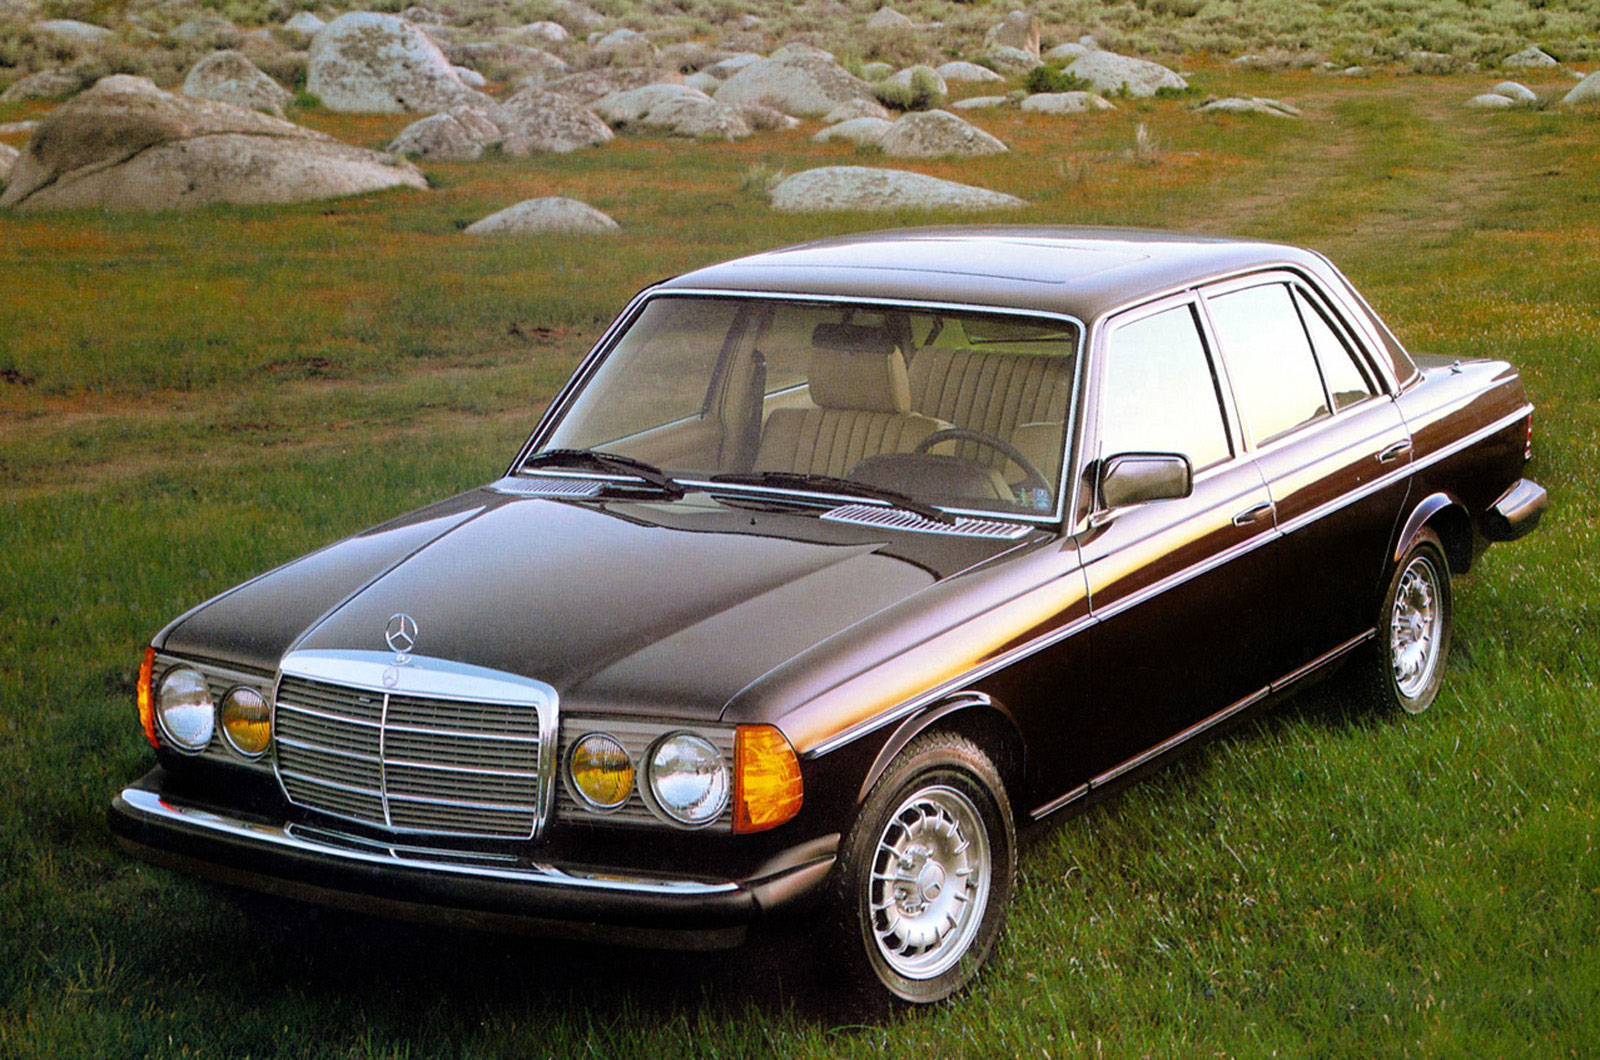 <p>California has long led the way in clean air legislation. In 1985, as production of its W123 was drawing to a close, Mercedes introduced a diesel particulate filter (DPF) on its 300D. However, the system was offered only in California and it wasn't reliable which is why Mercedes soon gave up on it. It would be another 15 years before a reliable DPF was available, this time from Peugeot which introduced a DPF with regeneration capabilities, on its 607 2.2 HDi of 2000. DPFs are <strong>mandatory</strong> today on diesel cars sold in Europe and America.</p><p><strong>GROUNDBREAKER SCORE: 6 </strong>– a useful contribution towards air quality.</p>